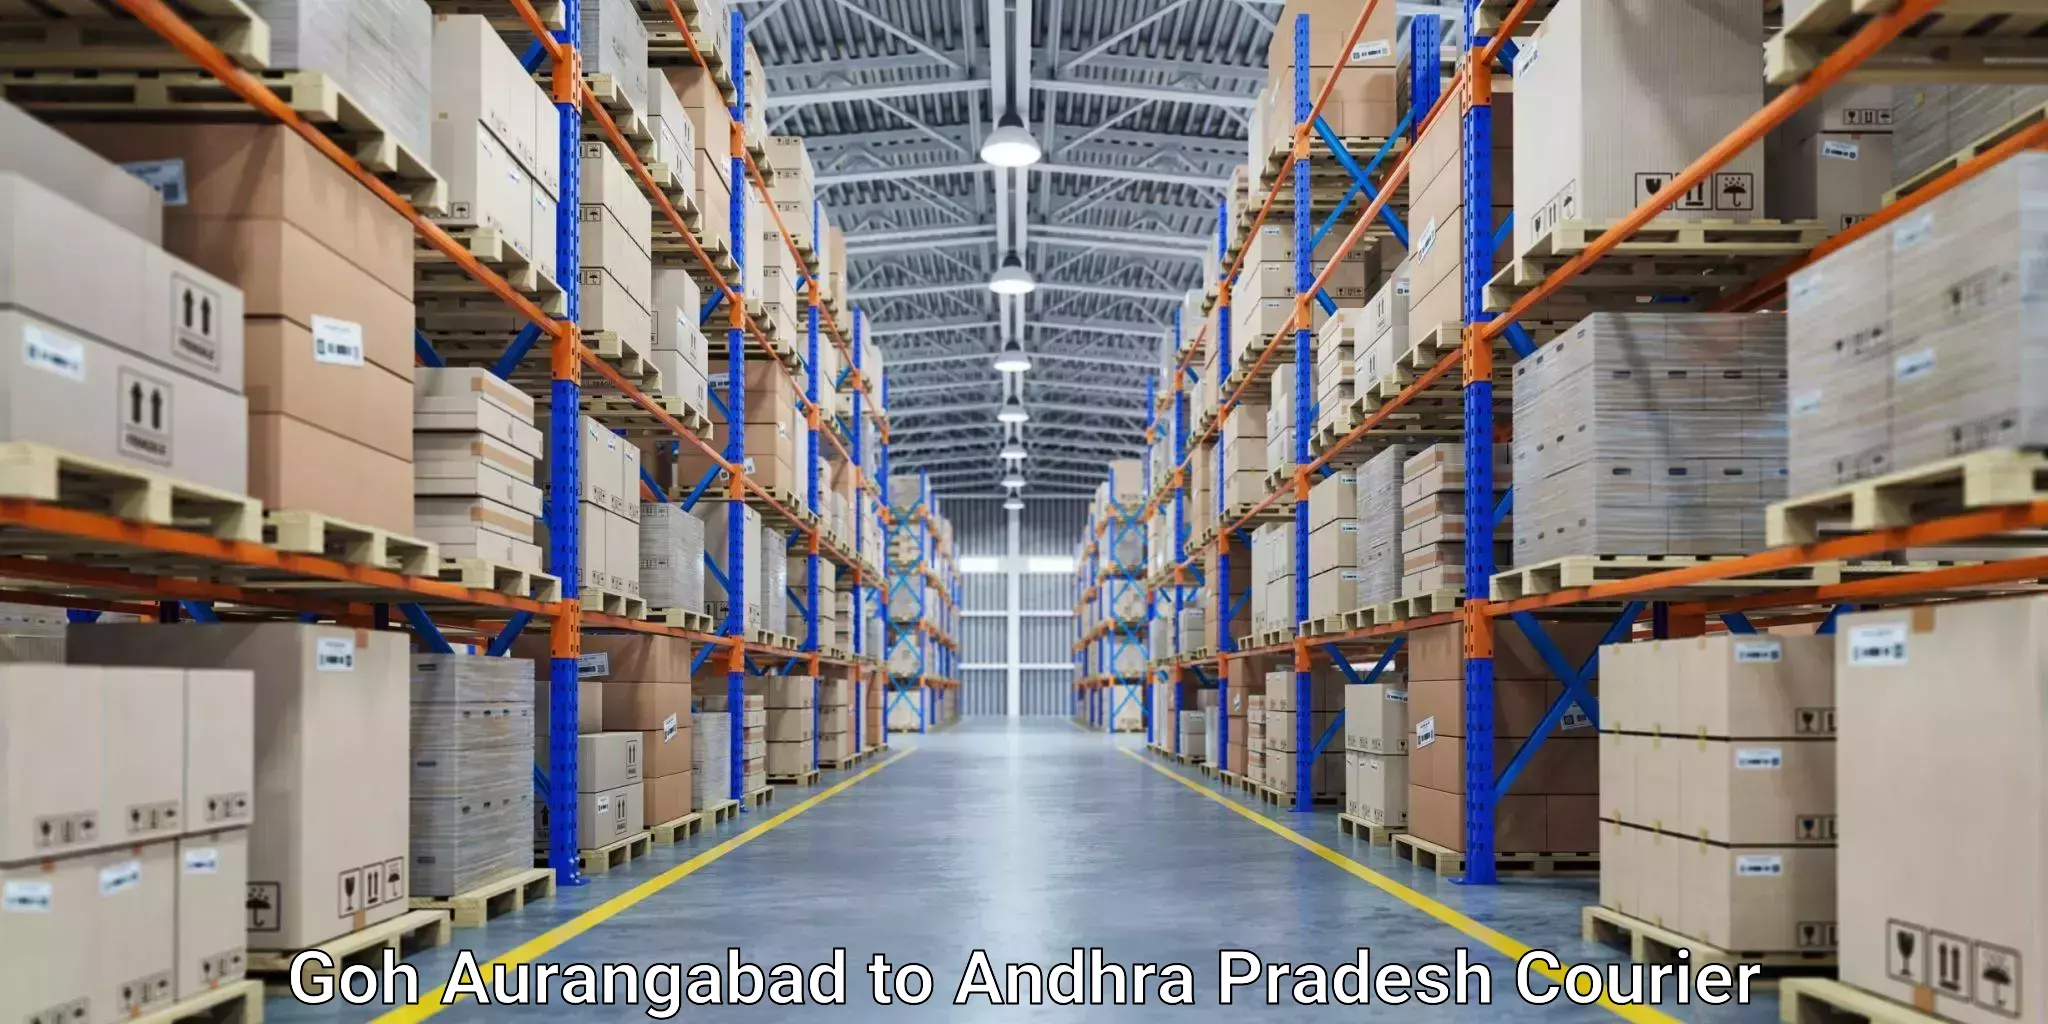 Small business couriers Goh Aurangabad to Visakhapatnam